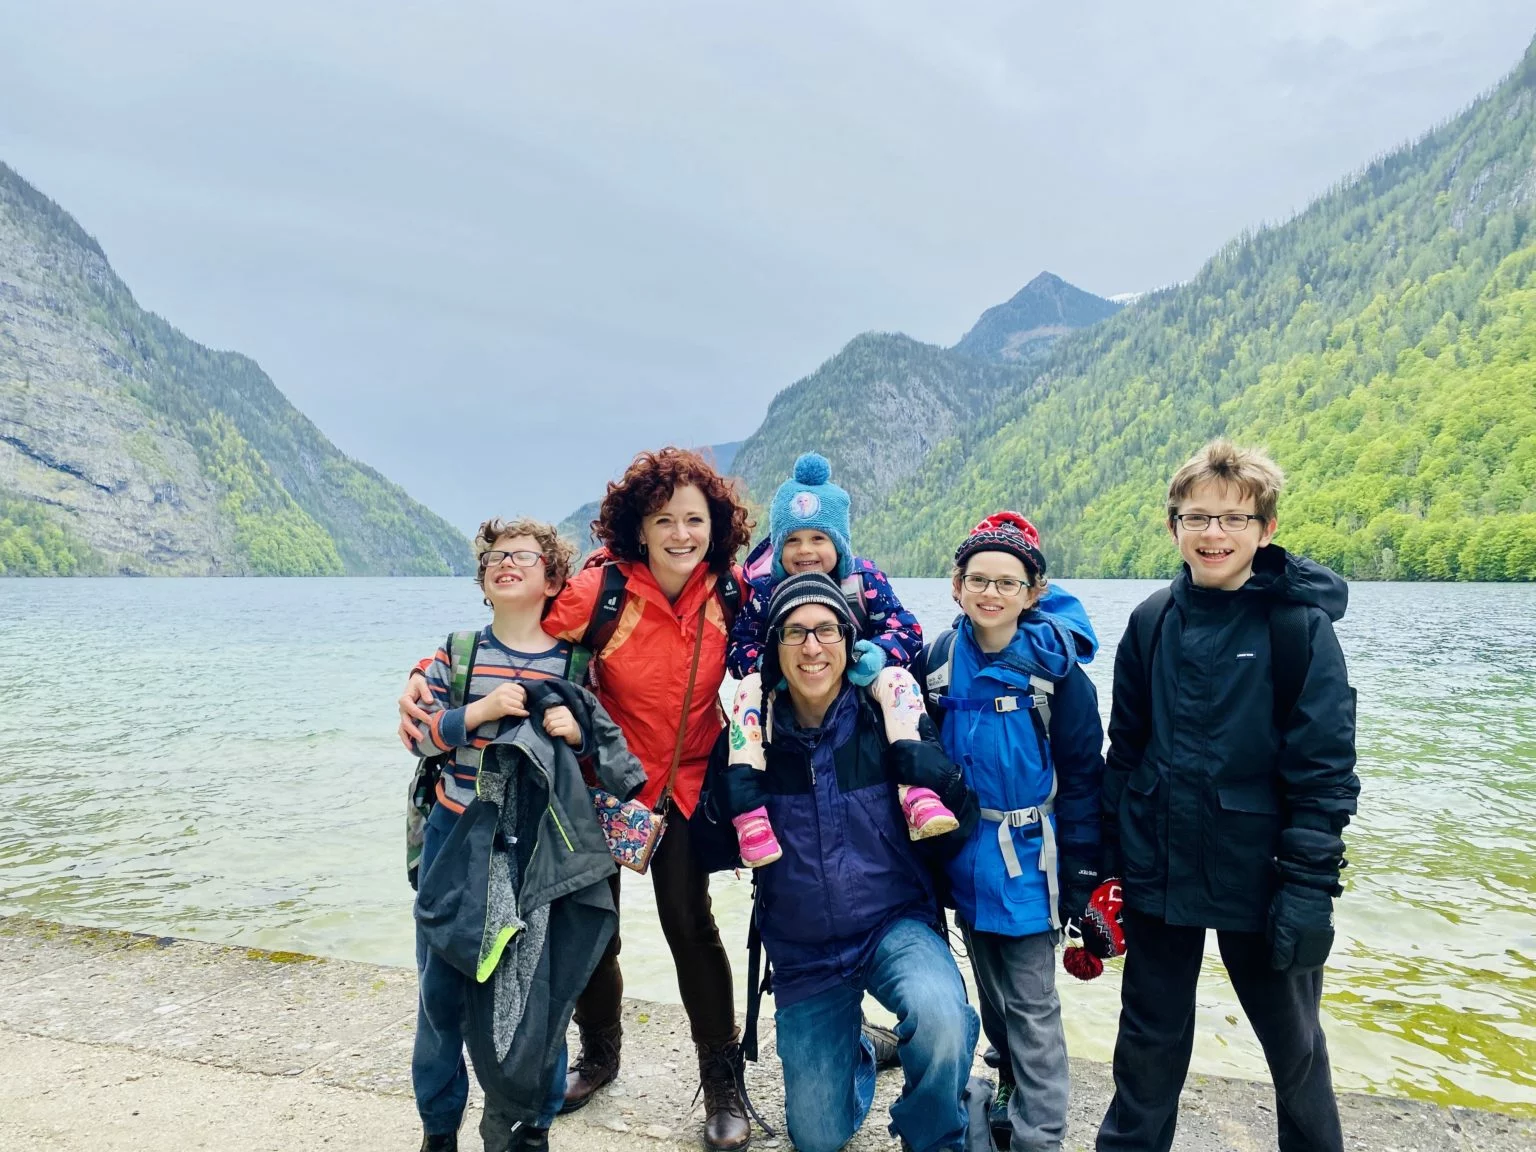 A Magical Day Trip to Königssee and Obersee Lakes